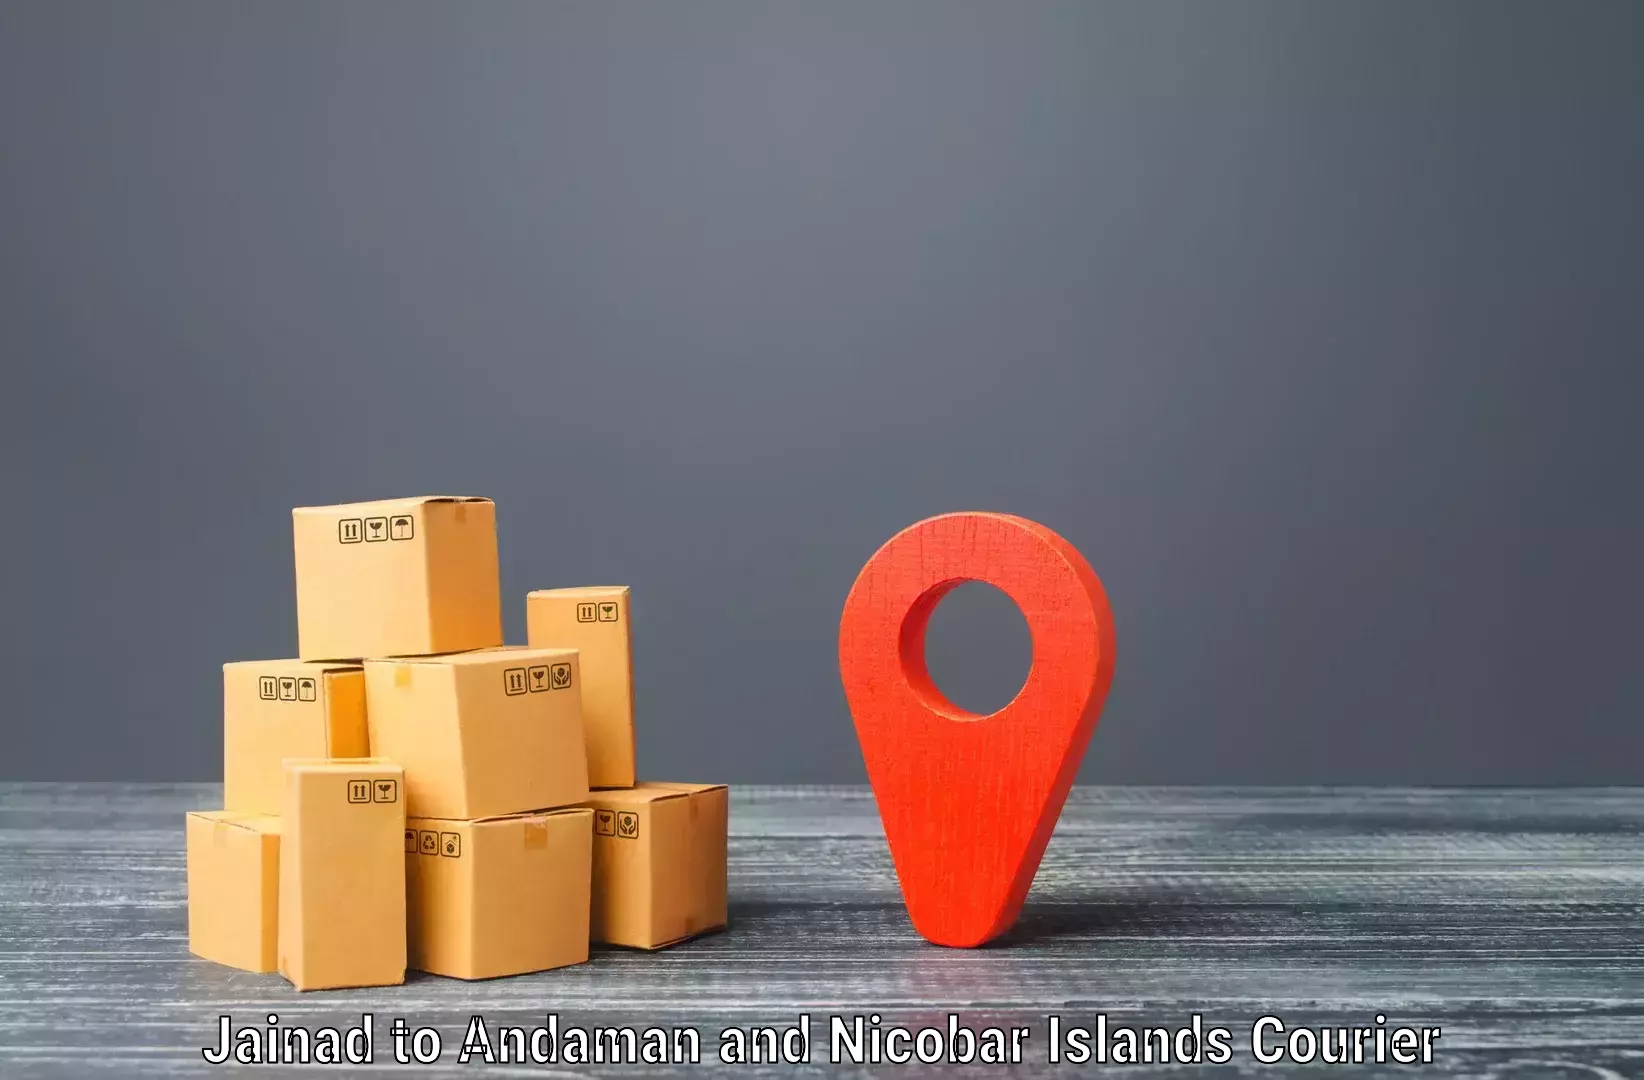 Specialized courier services in Jainad to Port Blair